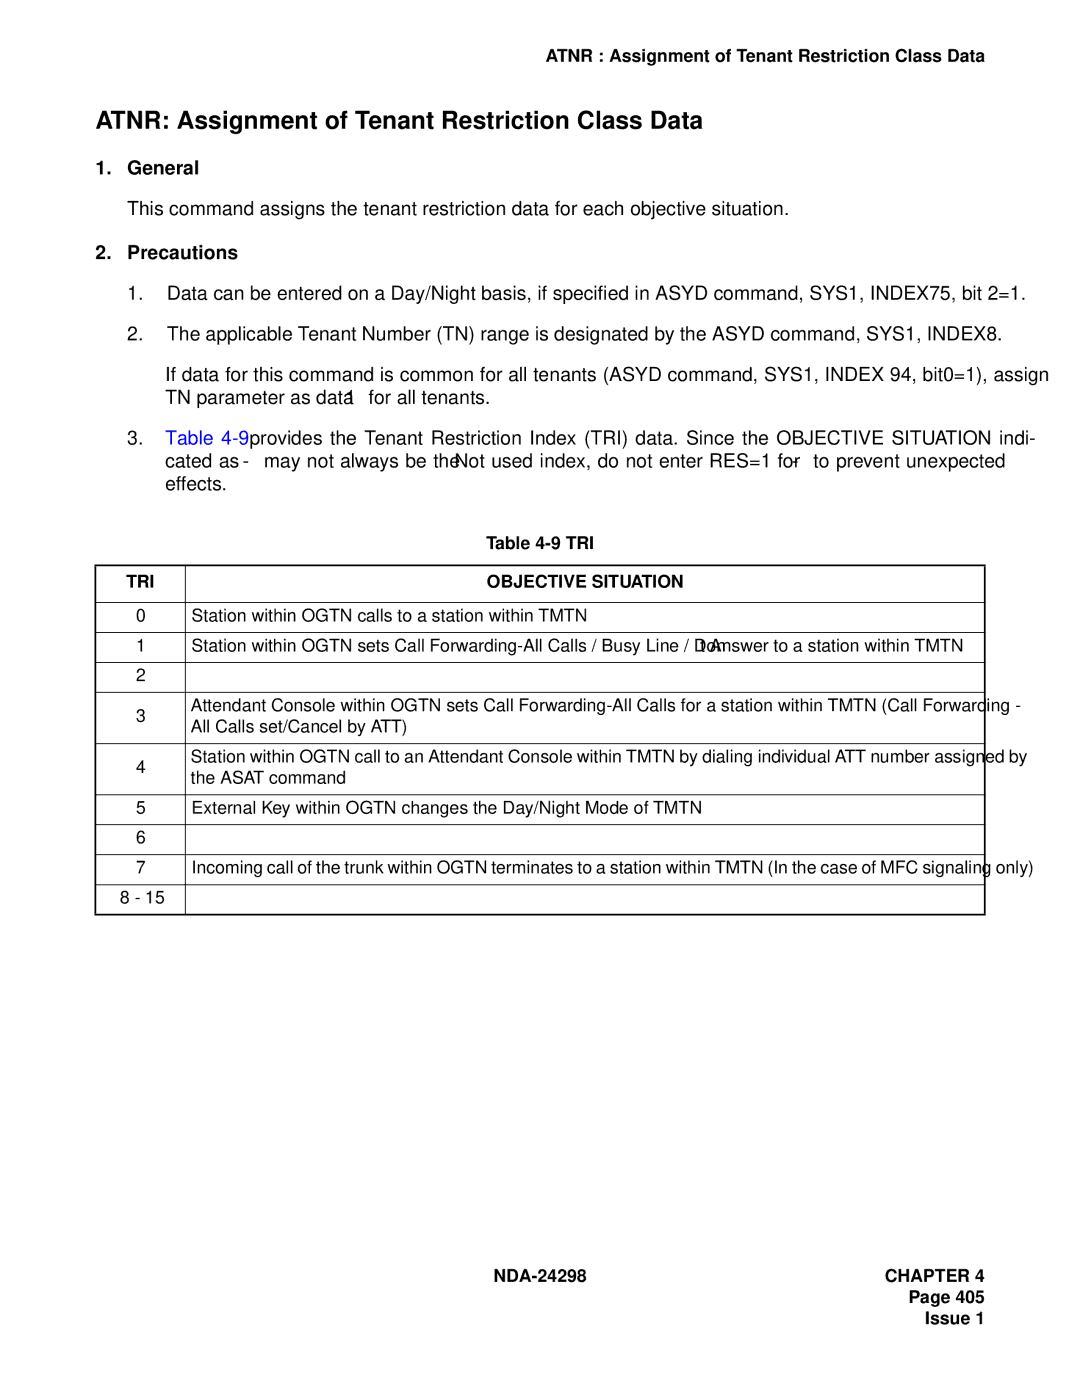 NEC NDA-24298 manual Atnr Assignment of Tenant Restriction Class Data, Tri, TRI Objective Situation 